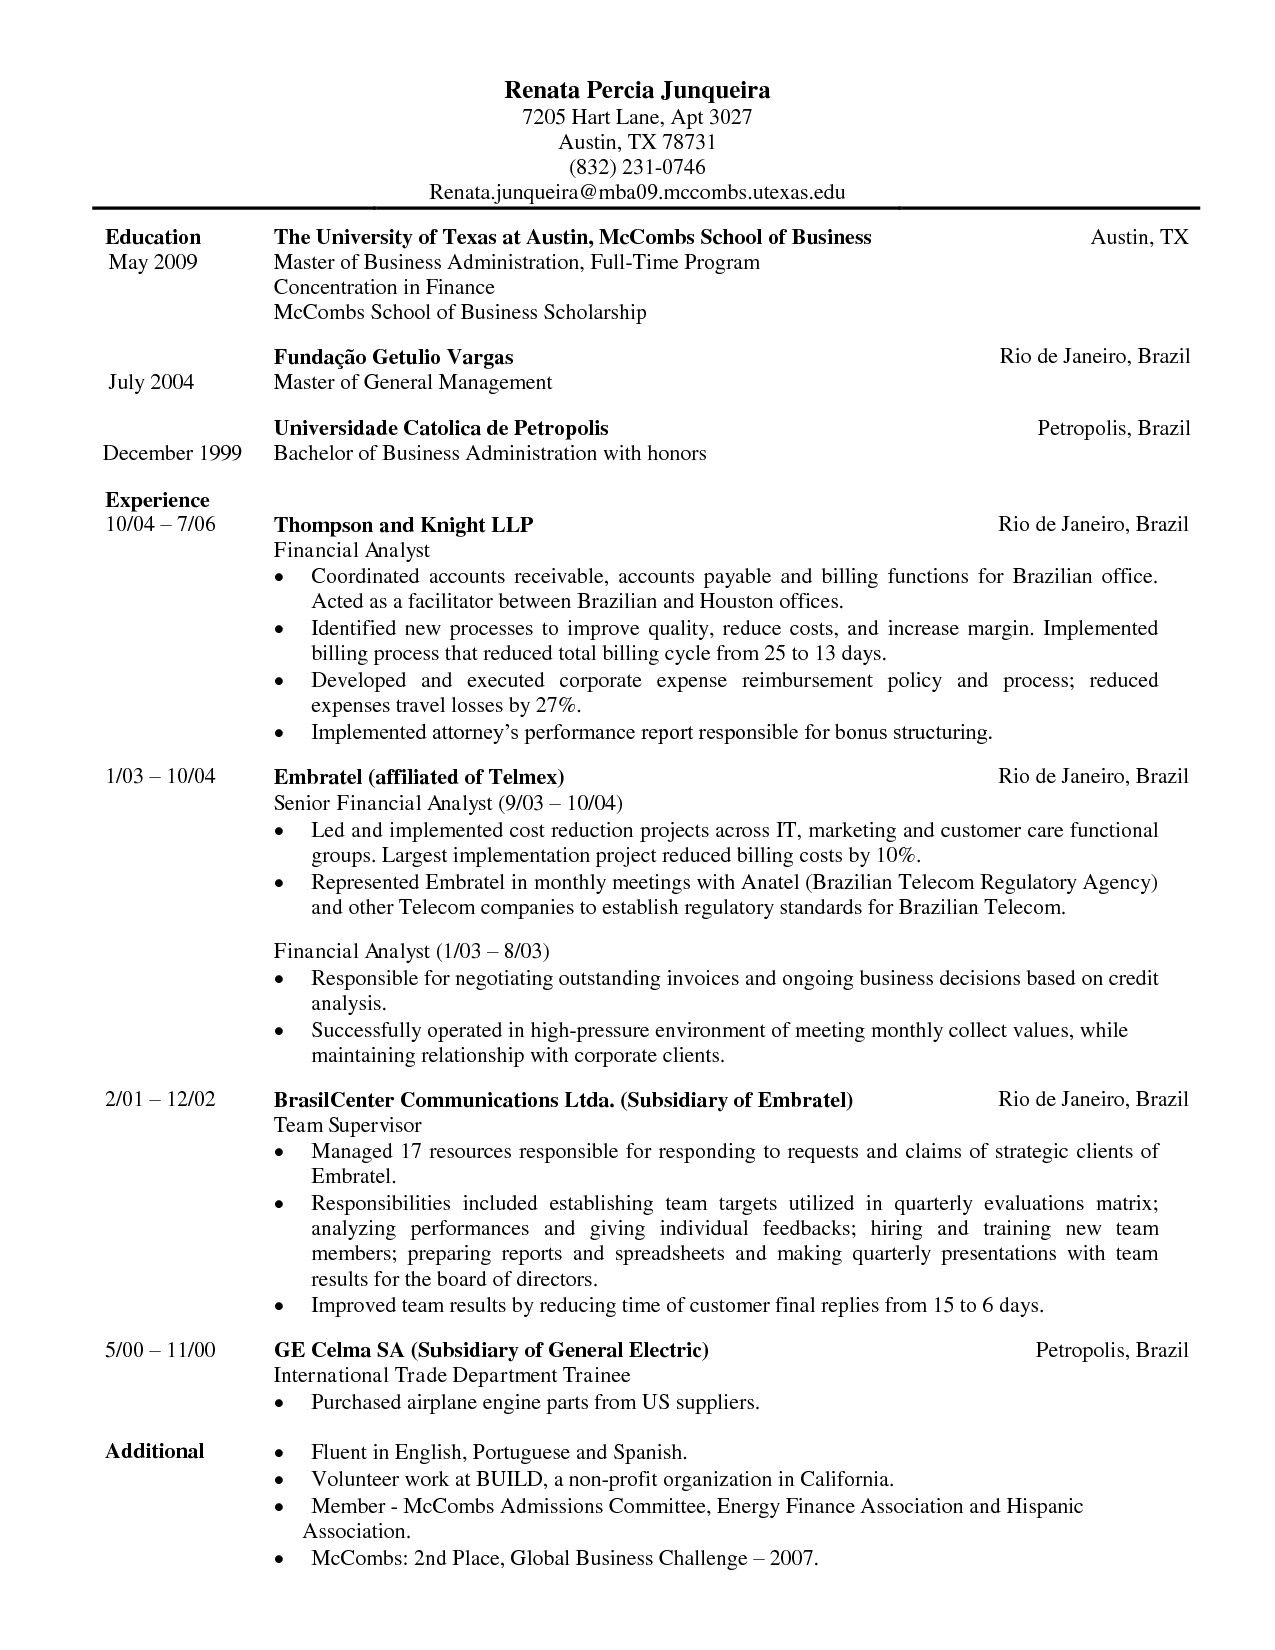 Mccombs Resume Template within dimensions 1275 X 1650